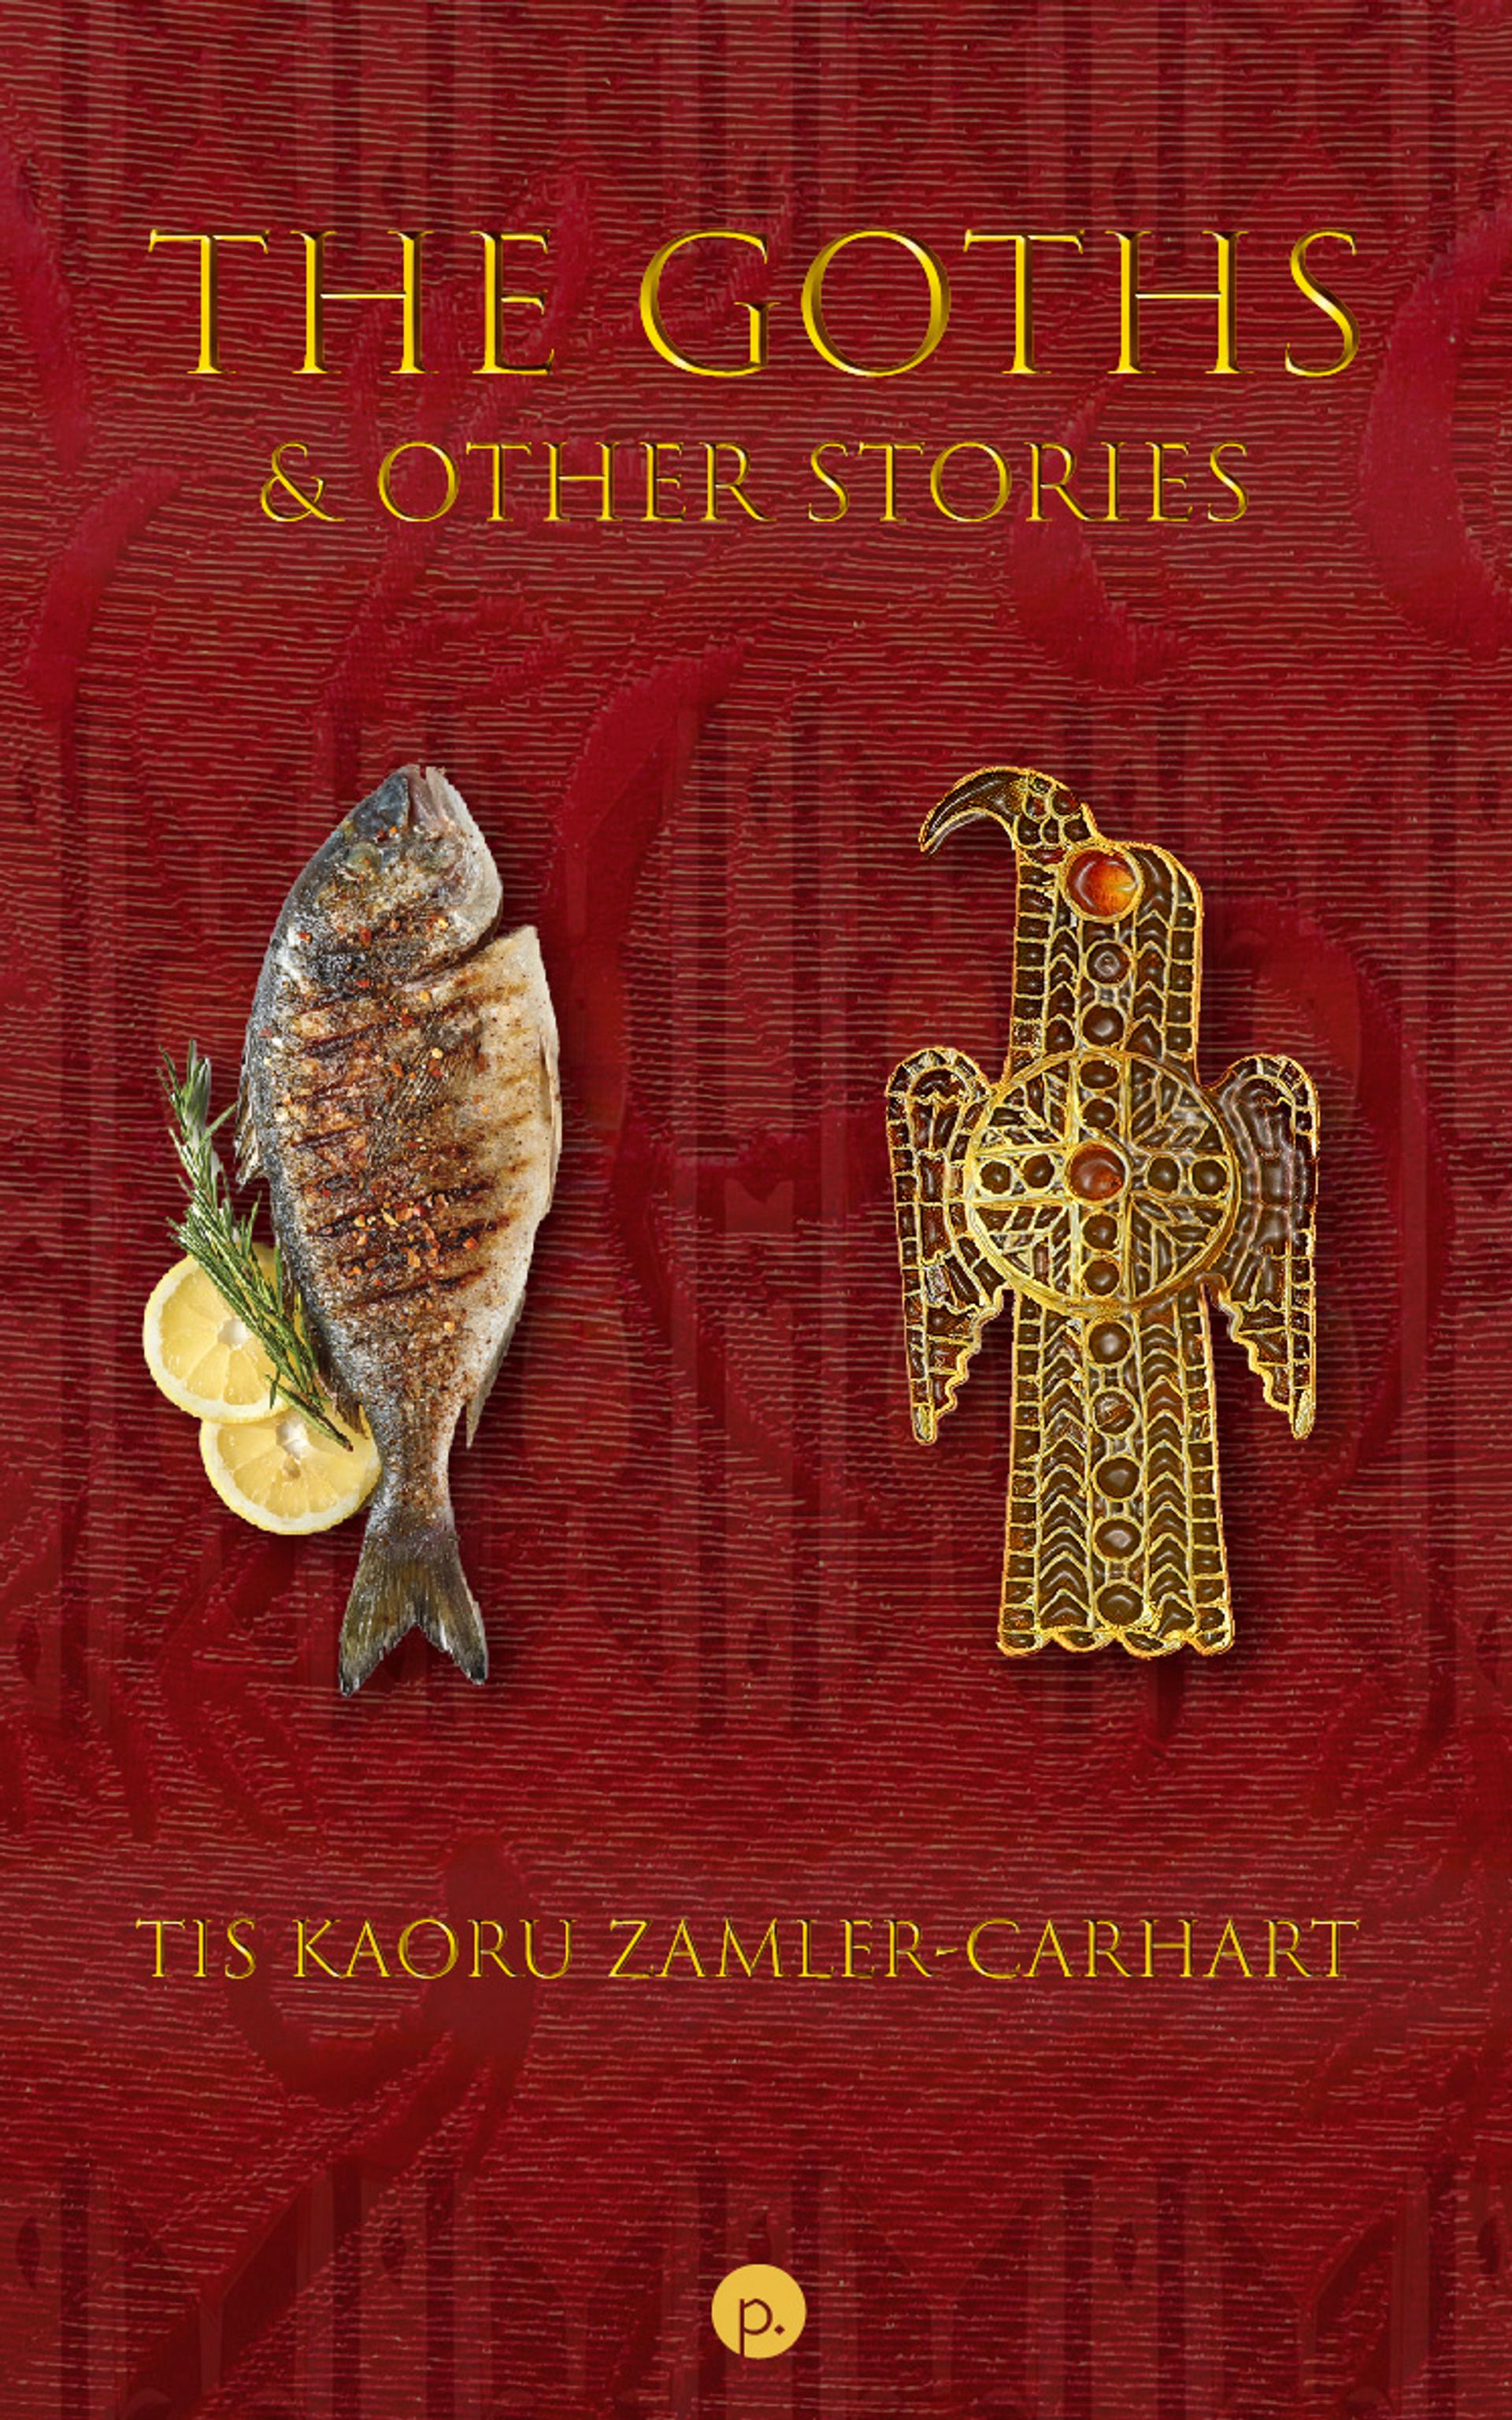 Cover of book titled The Goths & Other Stories (2nd edn.)